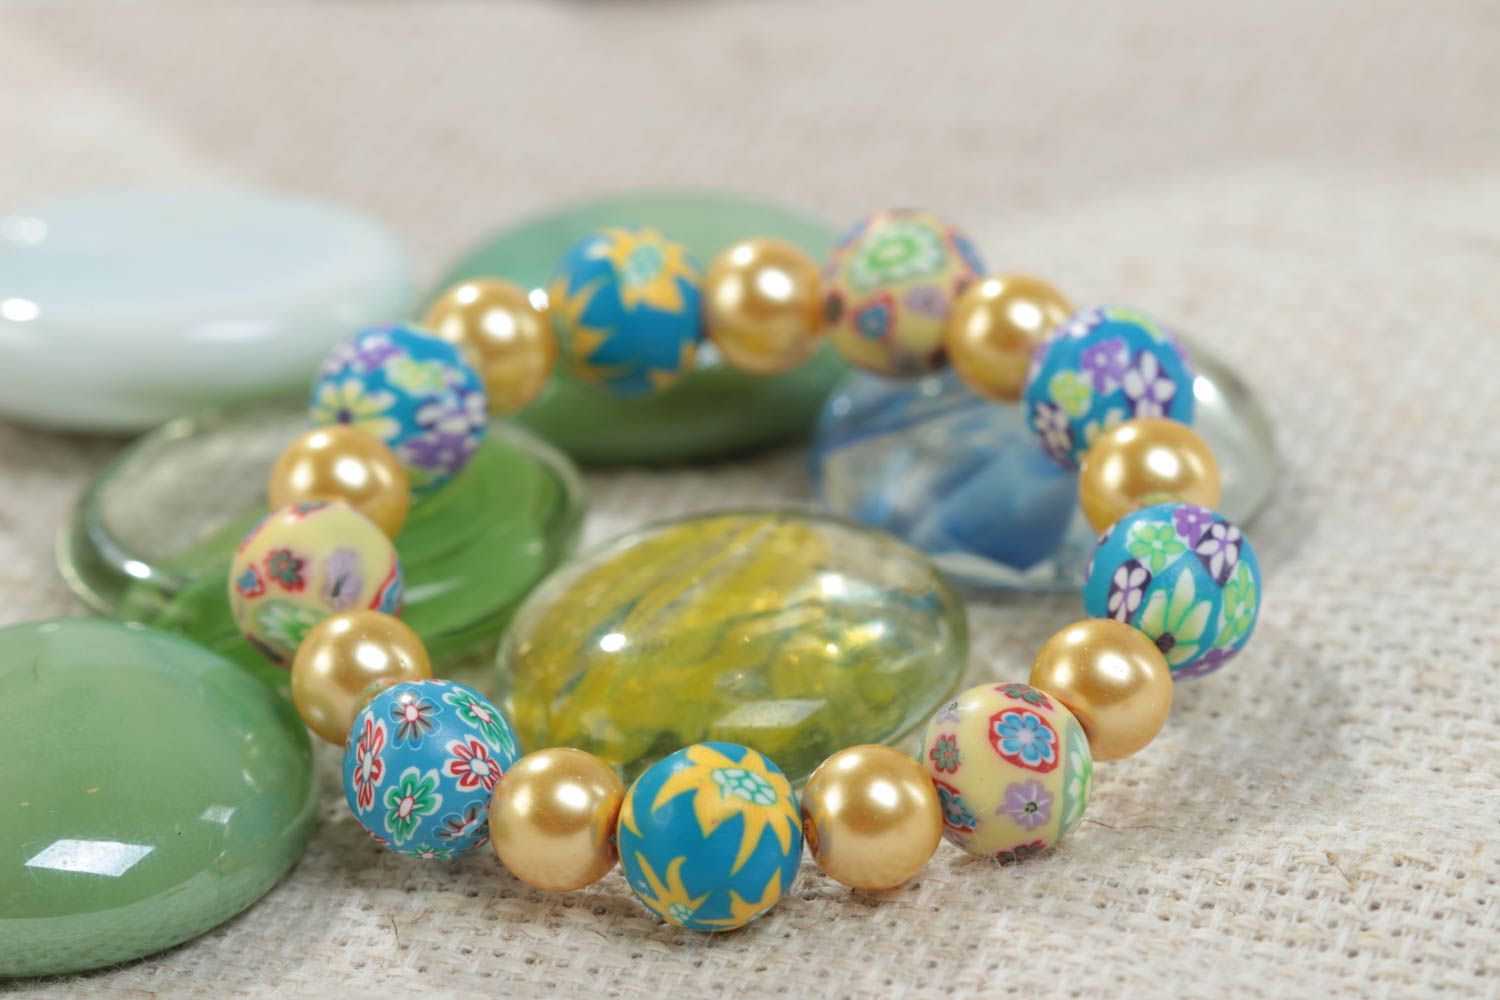 Homemade children's wrist bracelet created of polymer clay and ceramic beads photo 1